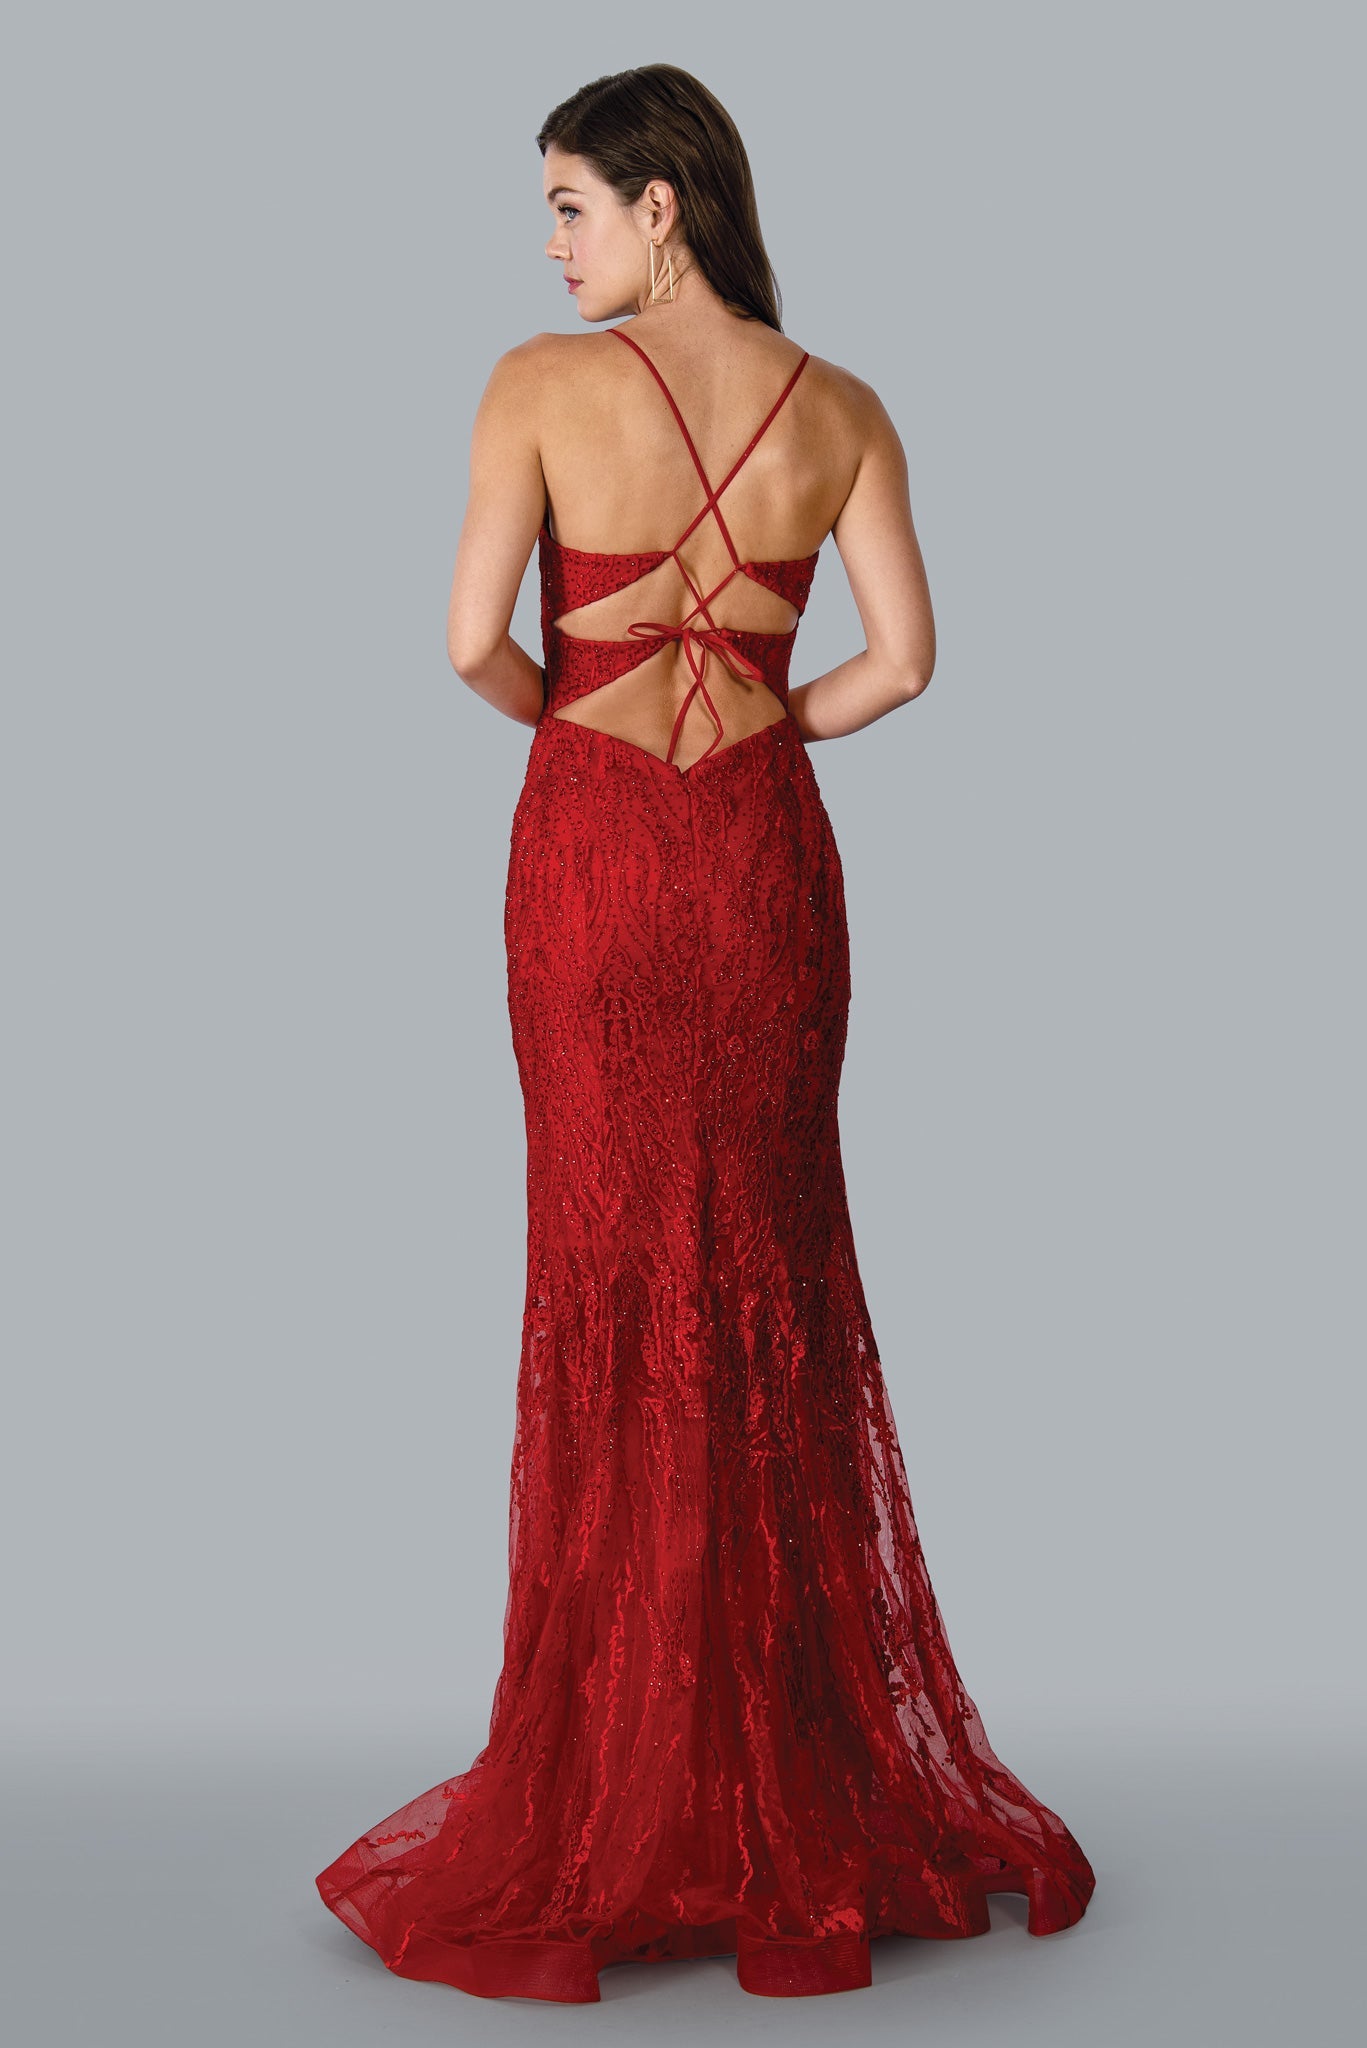 Stella Couture 23140 Long Fitted Crystal Lace Mermaid Prom Dress Backless Formal Gown Corset  Sizes: 0-16  Colors: Red, Yellow, Navy